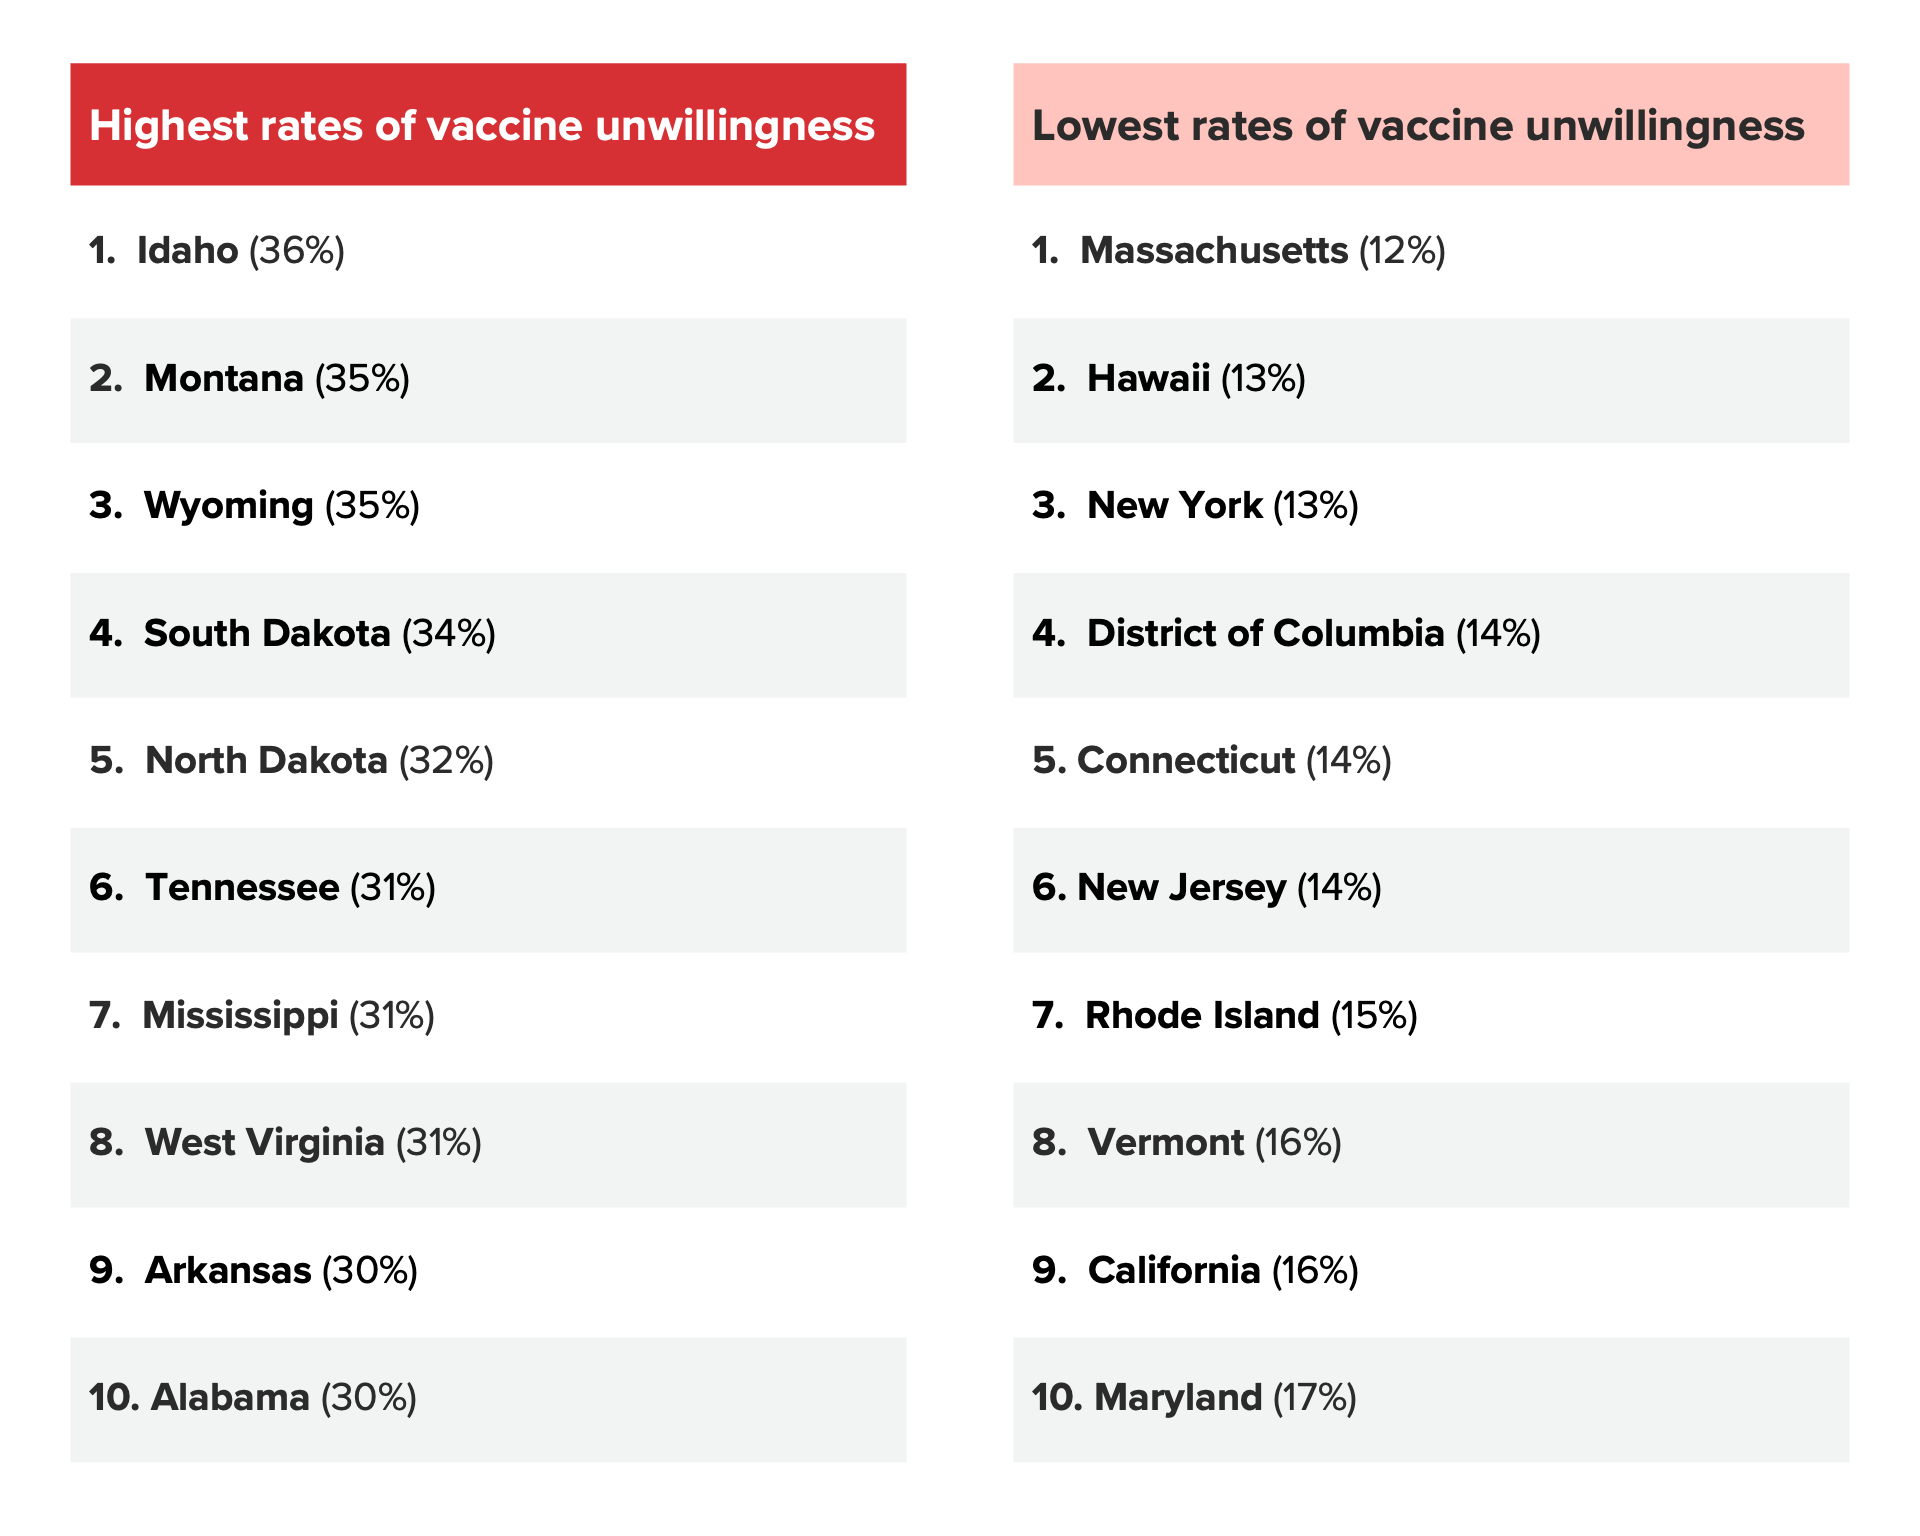 Where Vaccine Opposition Rates Are Highest and Lowest